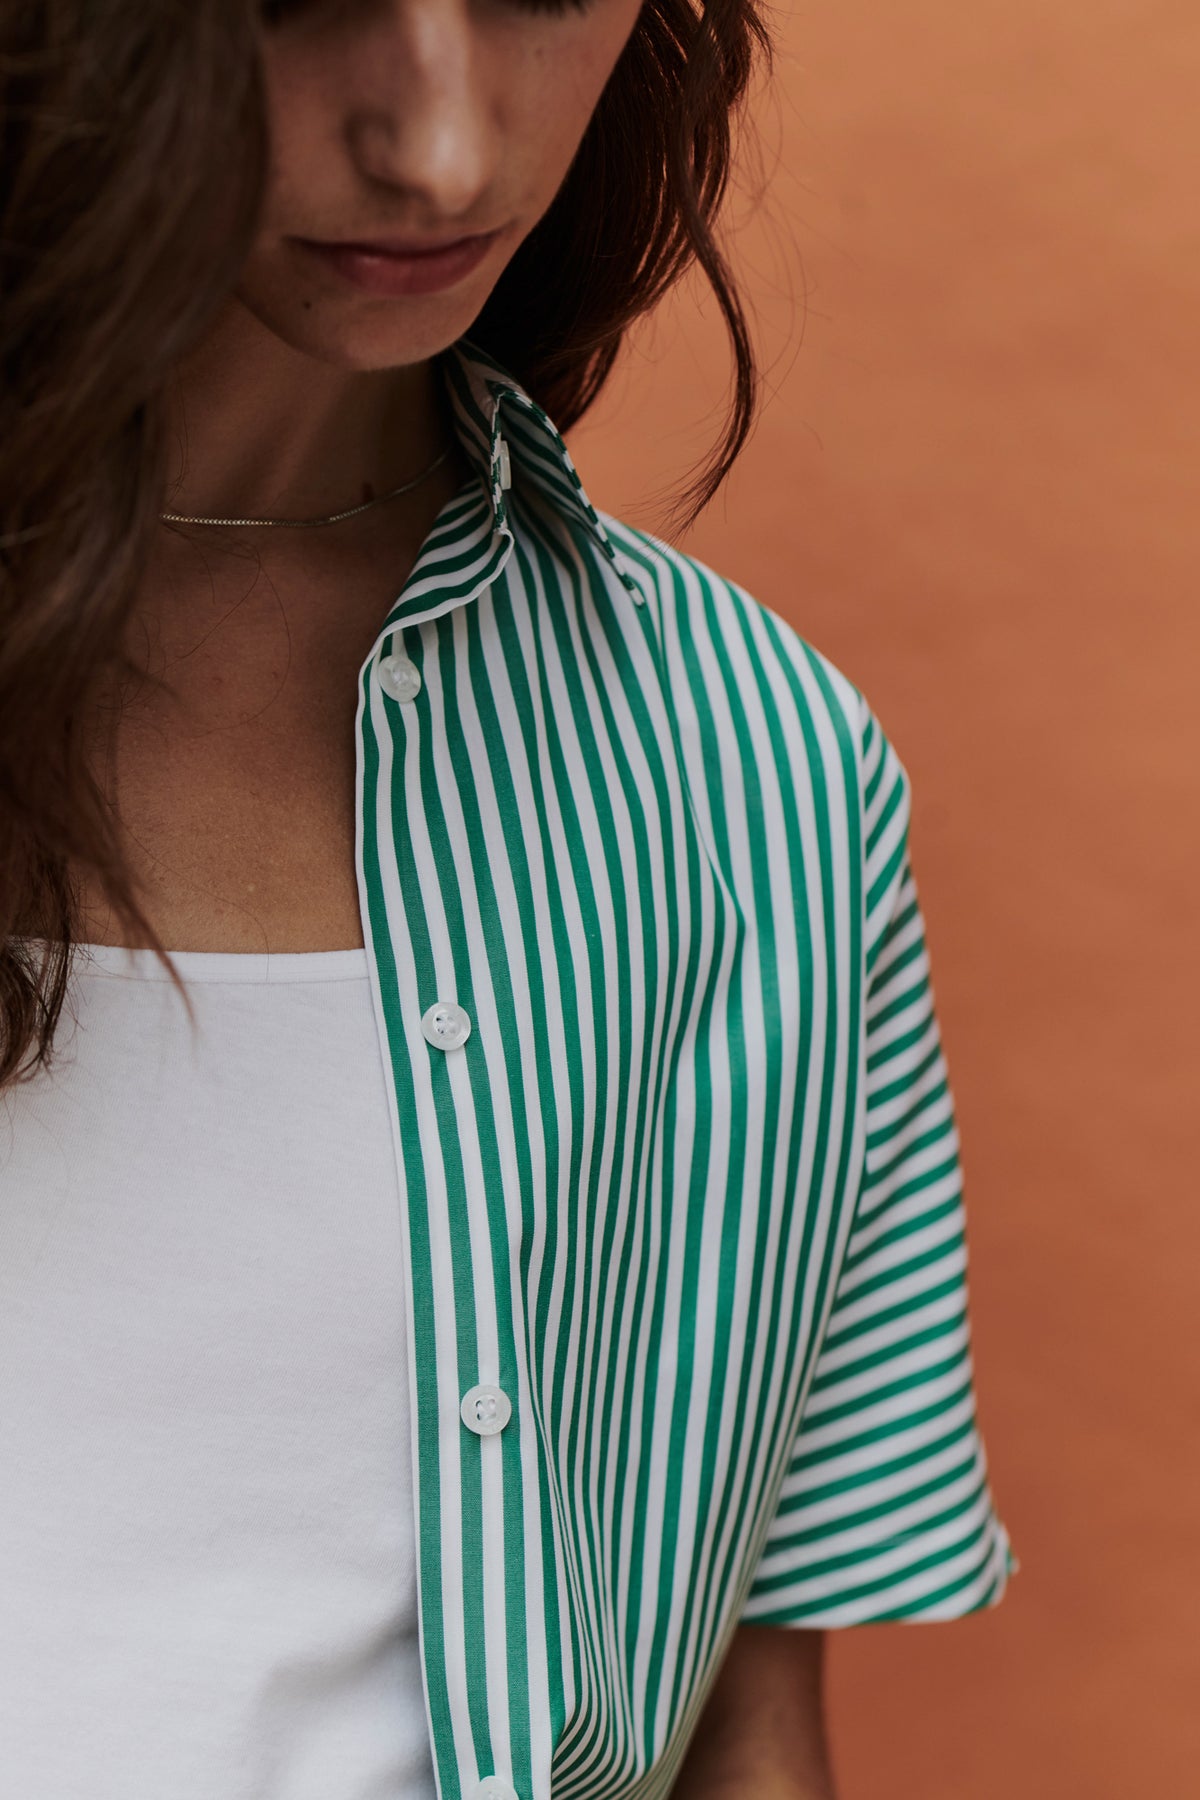 
            Close up of a woman wearing green and white striped shirt